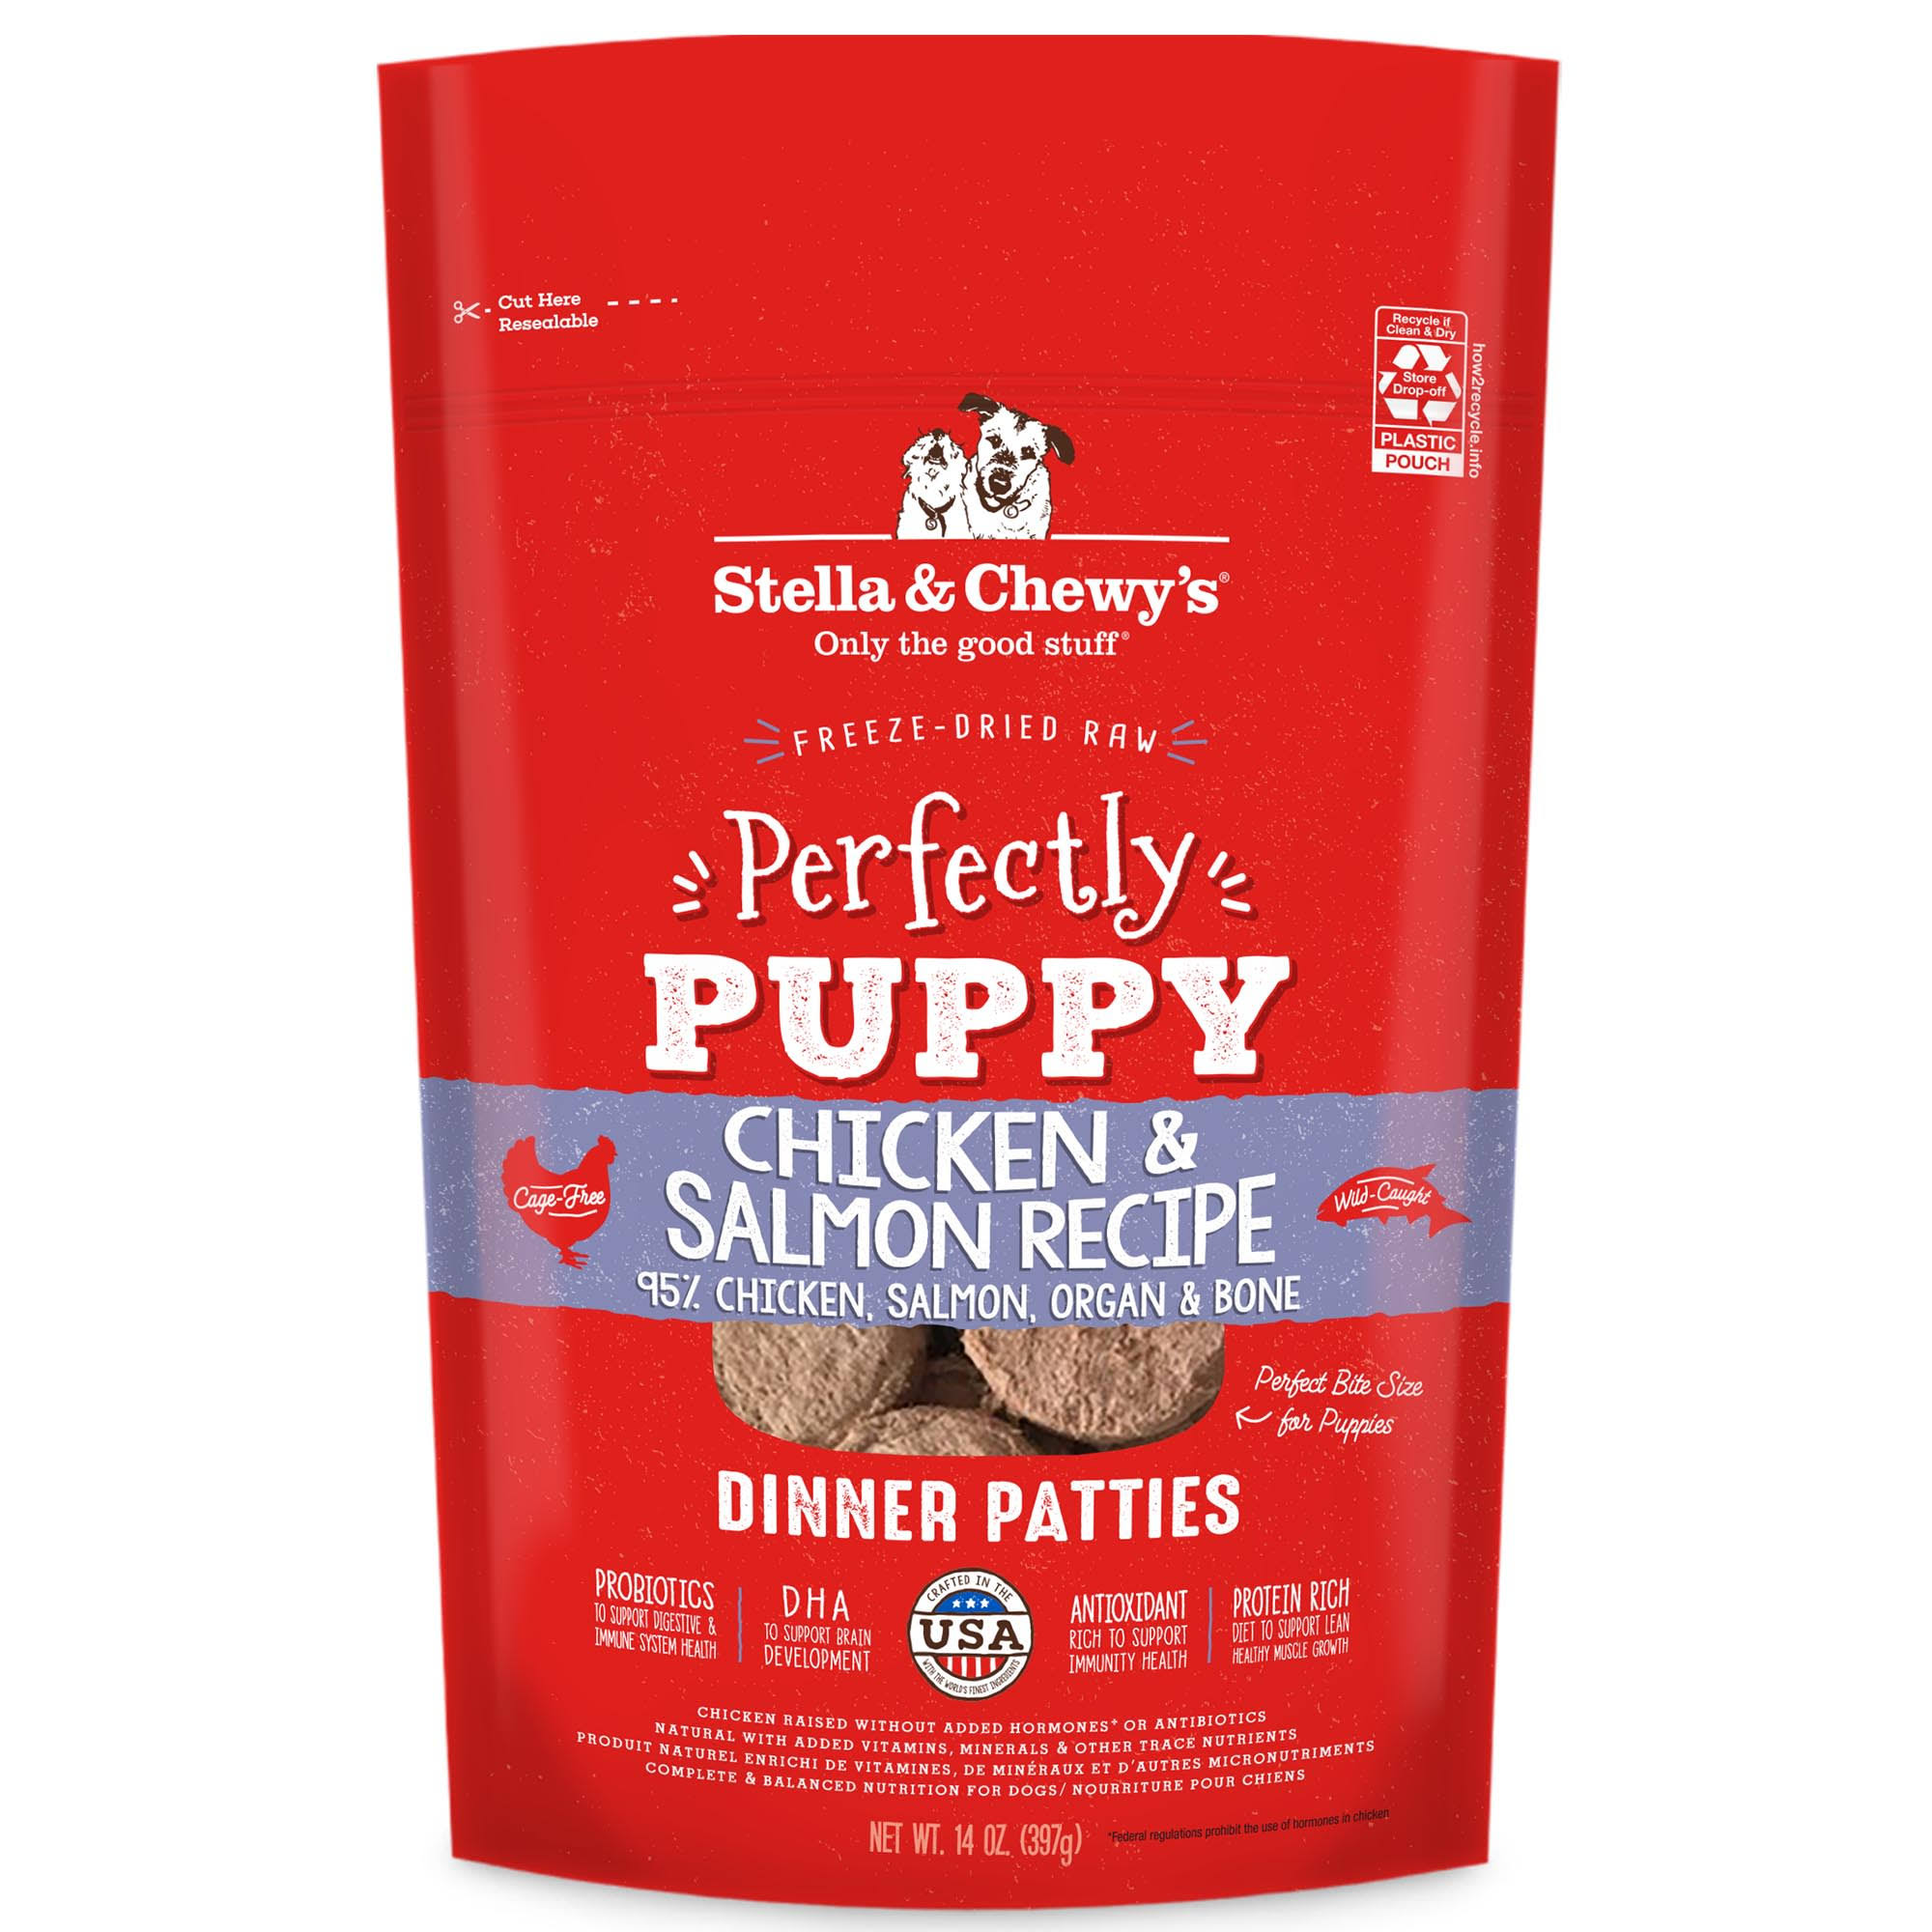 Stella & Chewy's Perfectly Puppy Chicken & Salmon Dinner Patties Freeze-Dried Raw Dog Food 14 oz